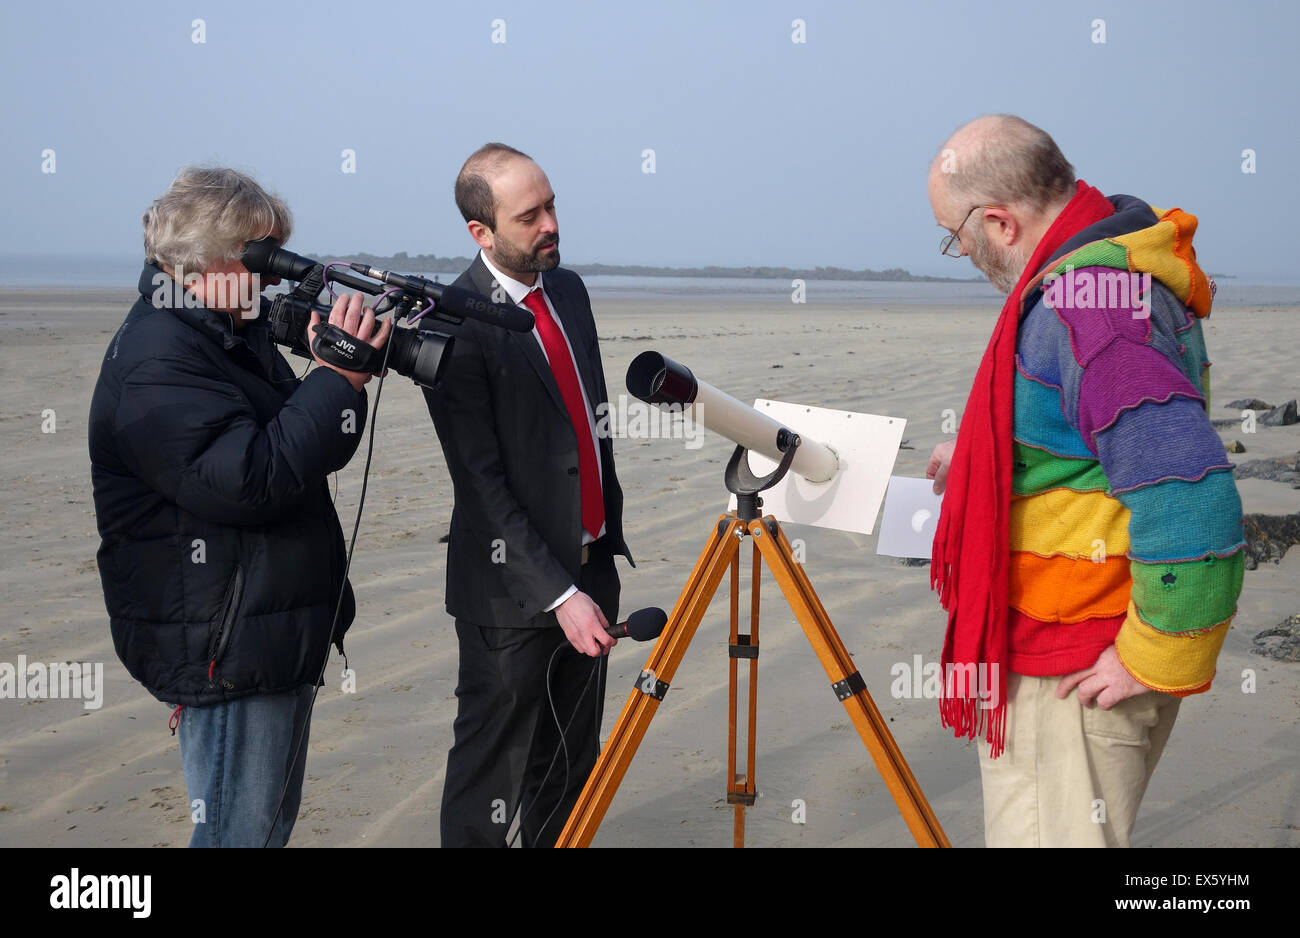 An Amateur Astronomer being interviewed by Journalists prior to an Eclipse of the Sun in Cornwall, UK Stock Photo